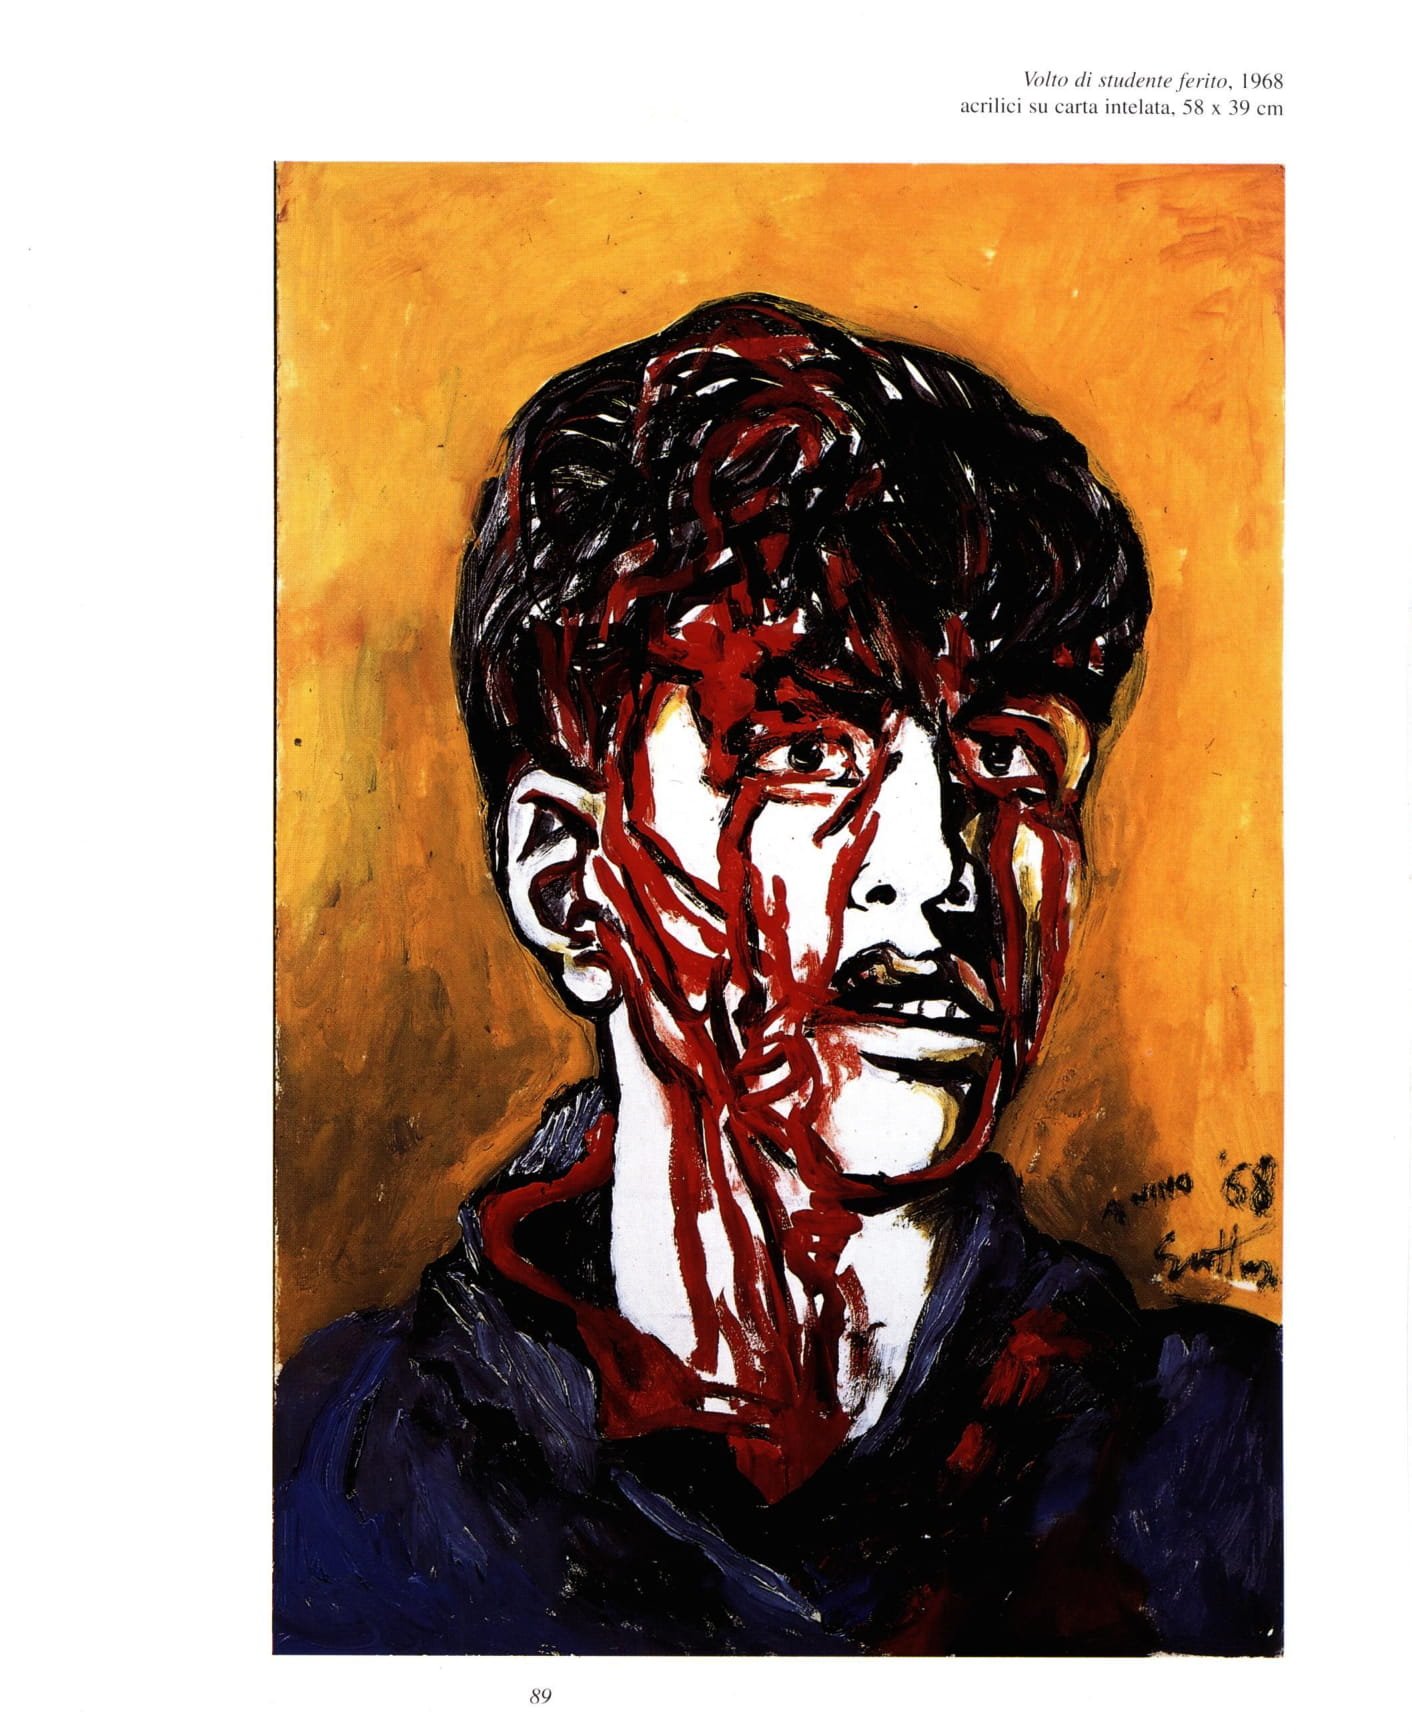 A painting of a man with blood dripping from his head down his face on a yellow-orange background.